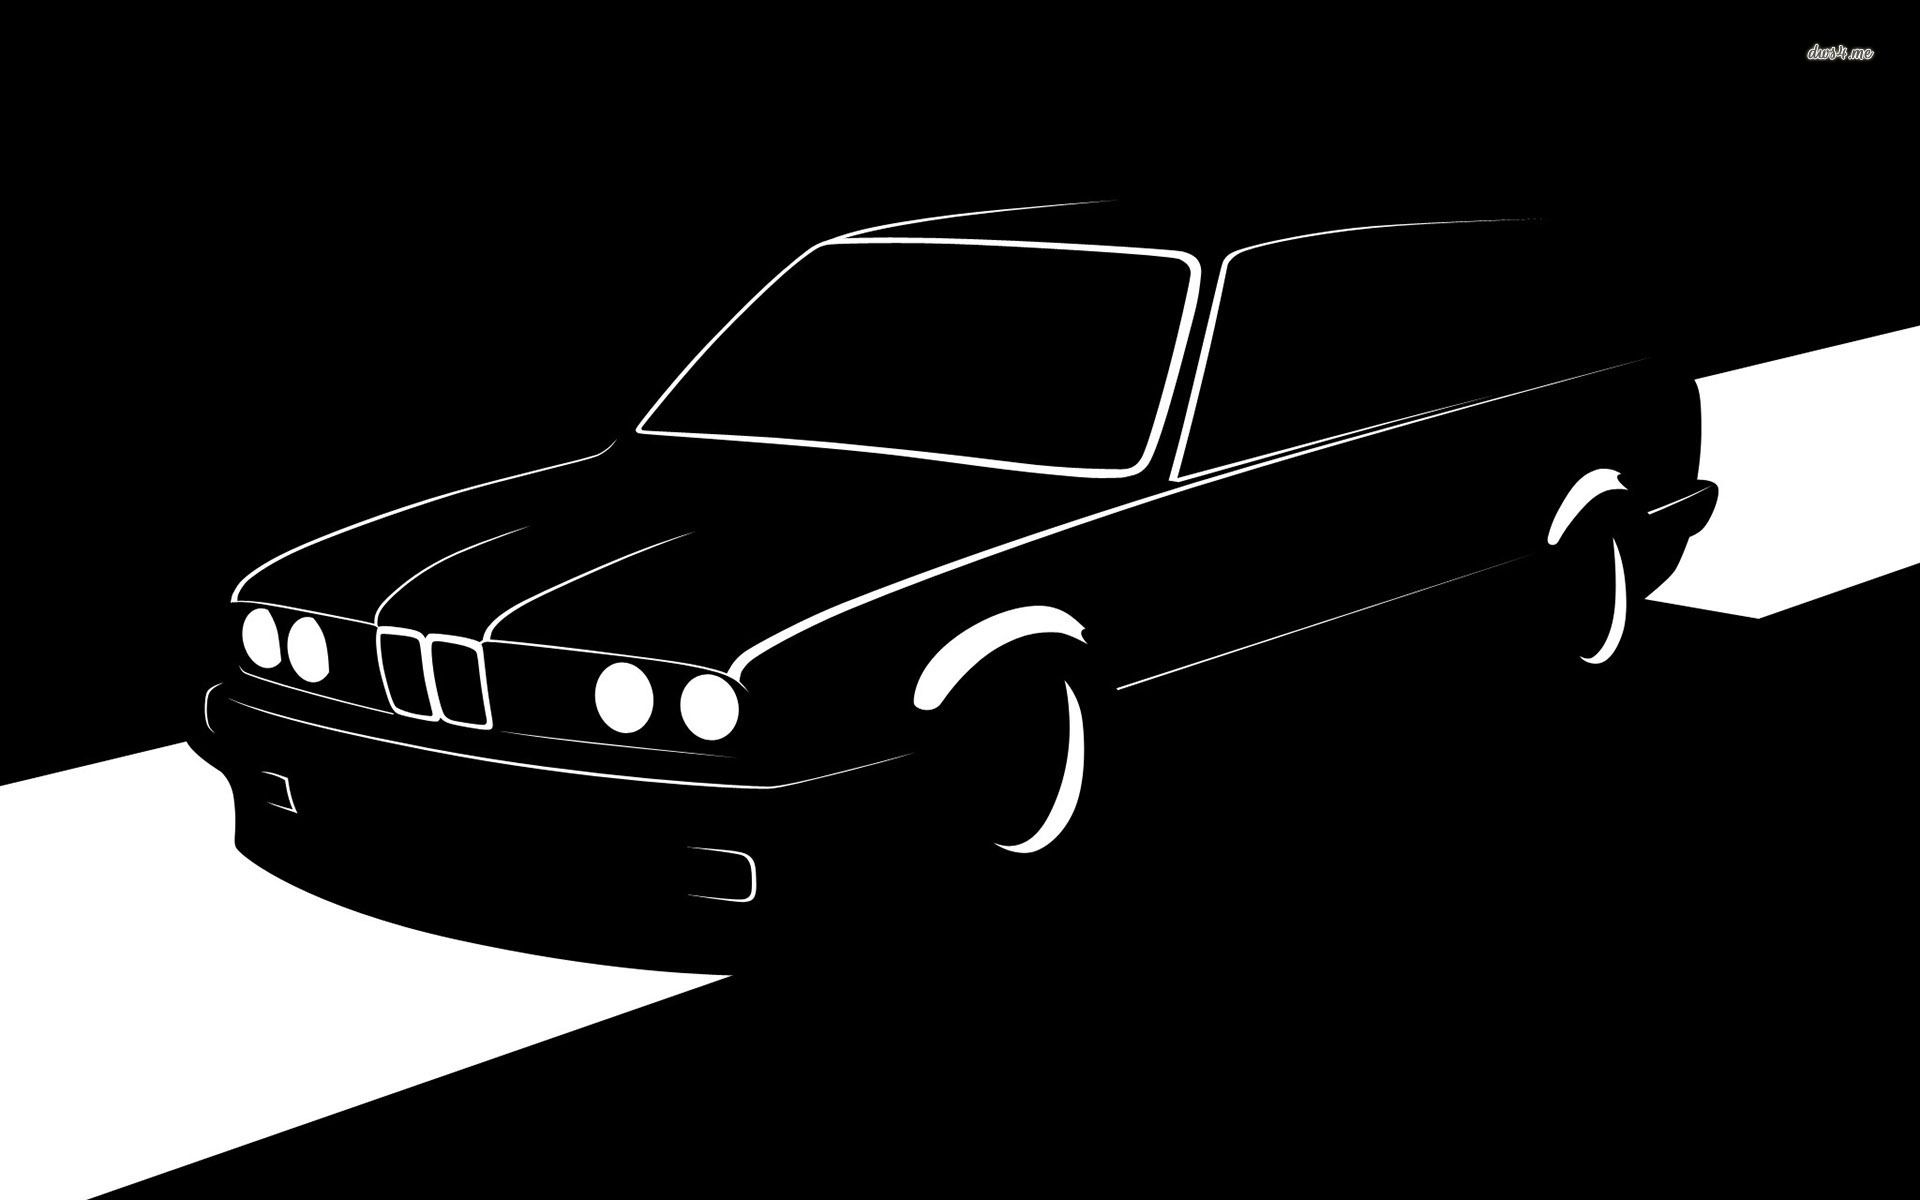 BMW E30 Touring silhouette wallpaper - Vector wallpapers - #16698